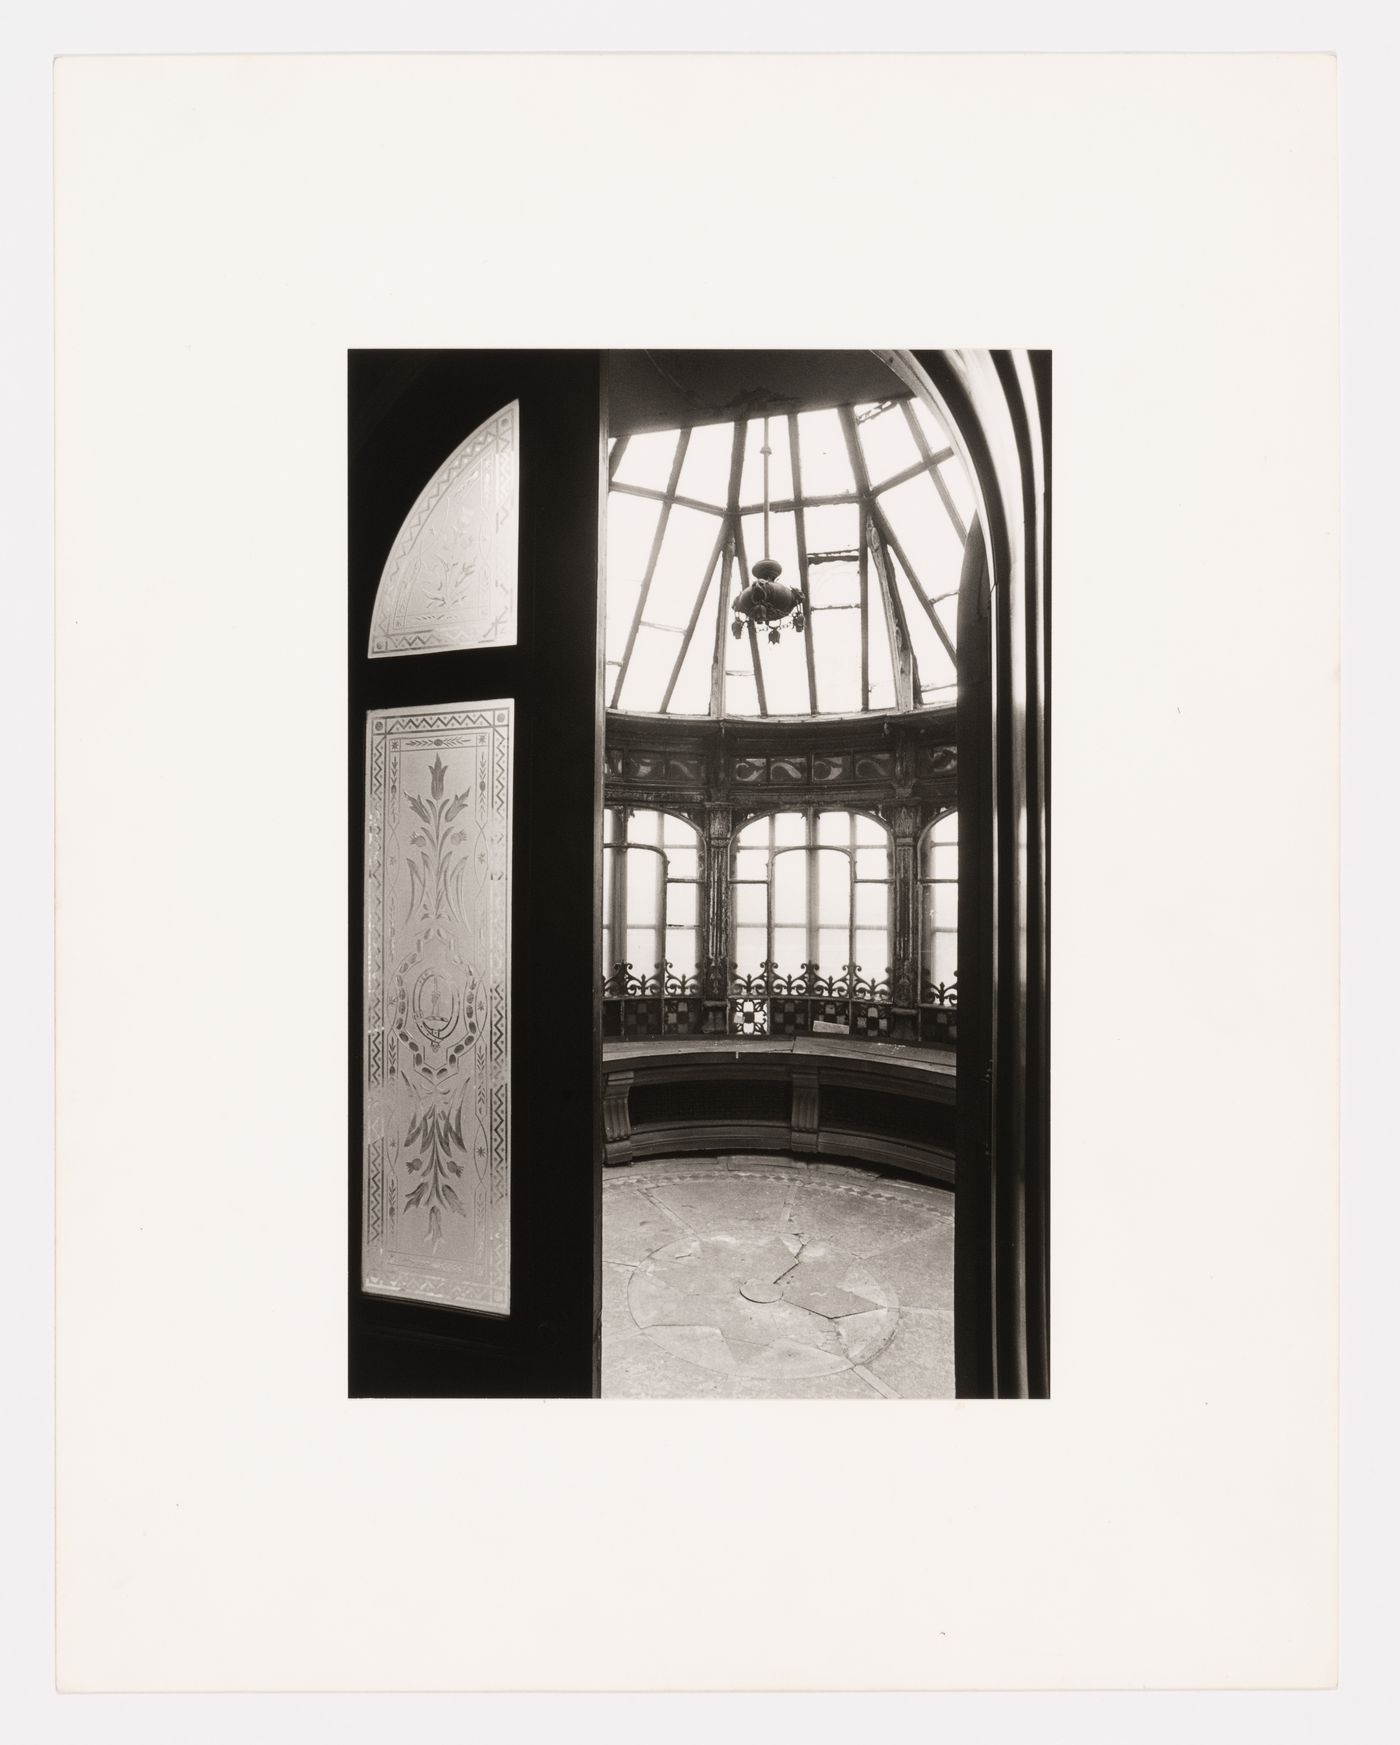 Interior view of the conservatory showing the frosted glass doors and the glazed and ironwork ceiling, Shaughnessy House, Montréal, Québec, Canada